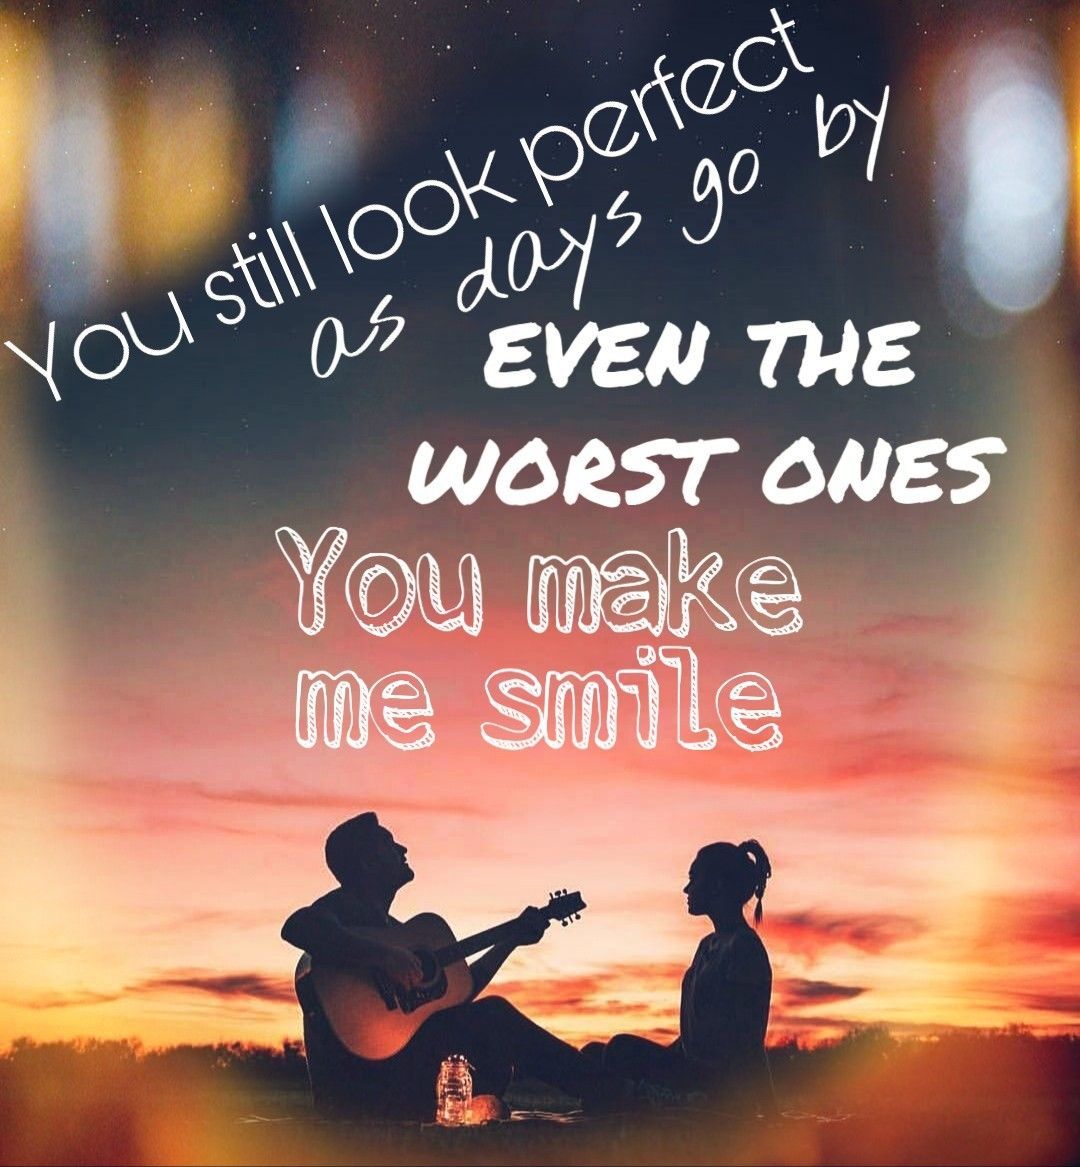 Love someone lyrics by Lukas Graham #lukasgraham #lyrics #music #songs #love #wallpaper #aesthetic #couples #co. Loving someone quotes, Song quotes, Cheesy quotes